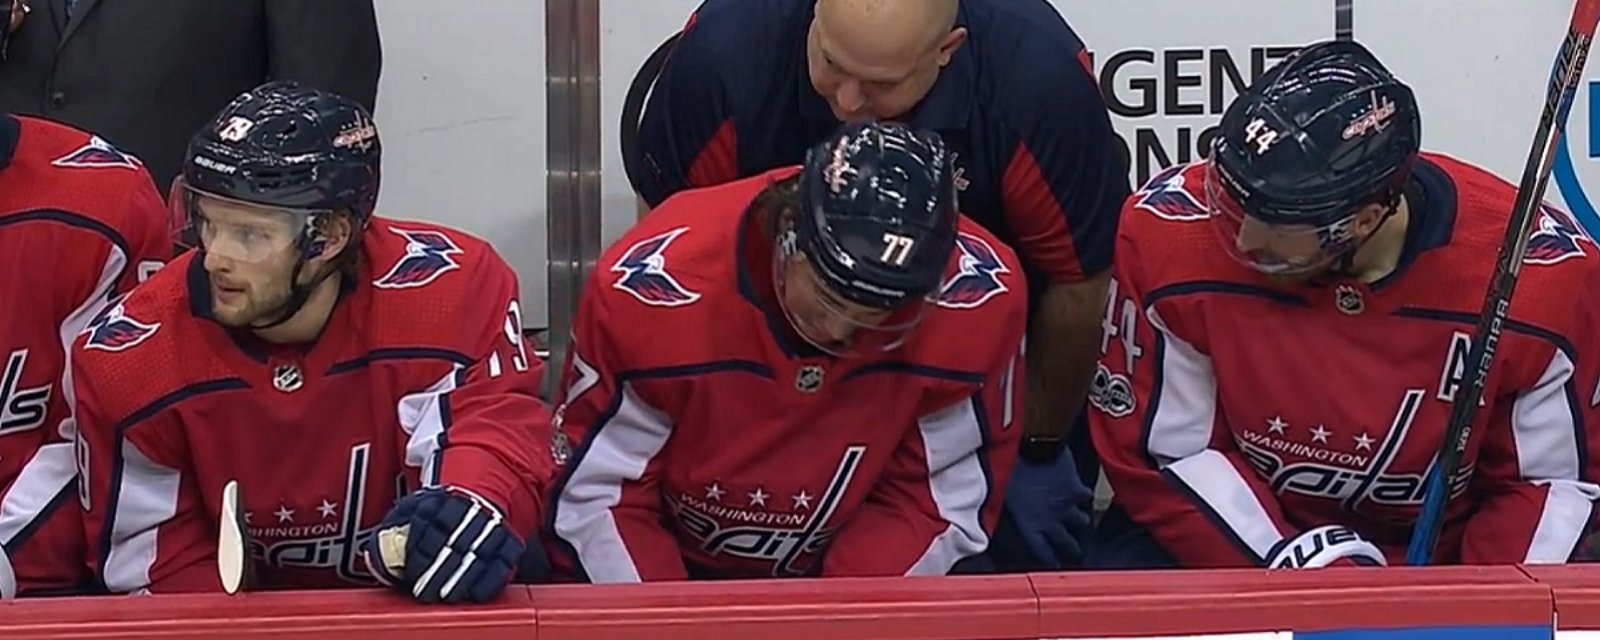 Breaking: T.J. Oshie may have been injured by his own teammate.